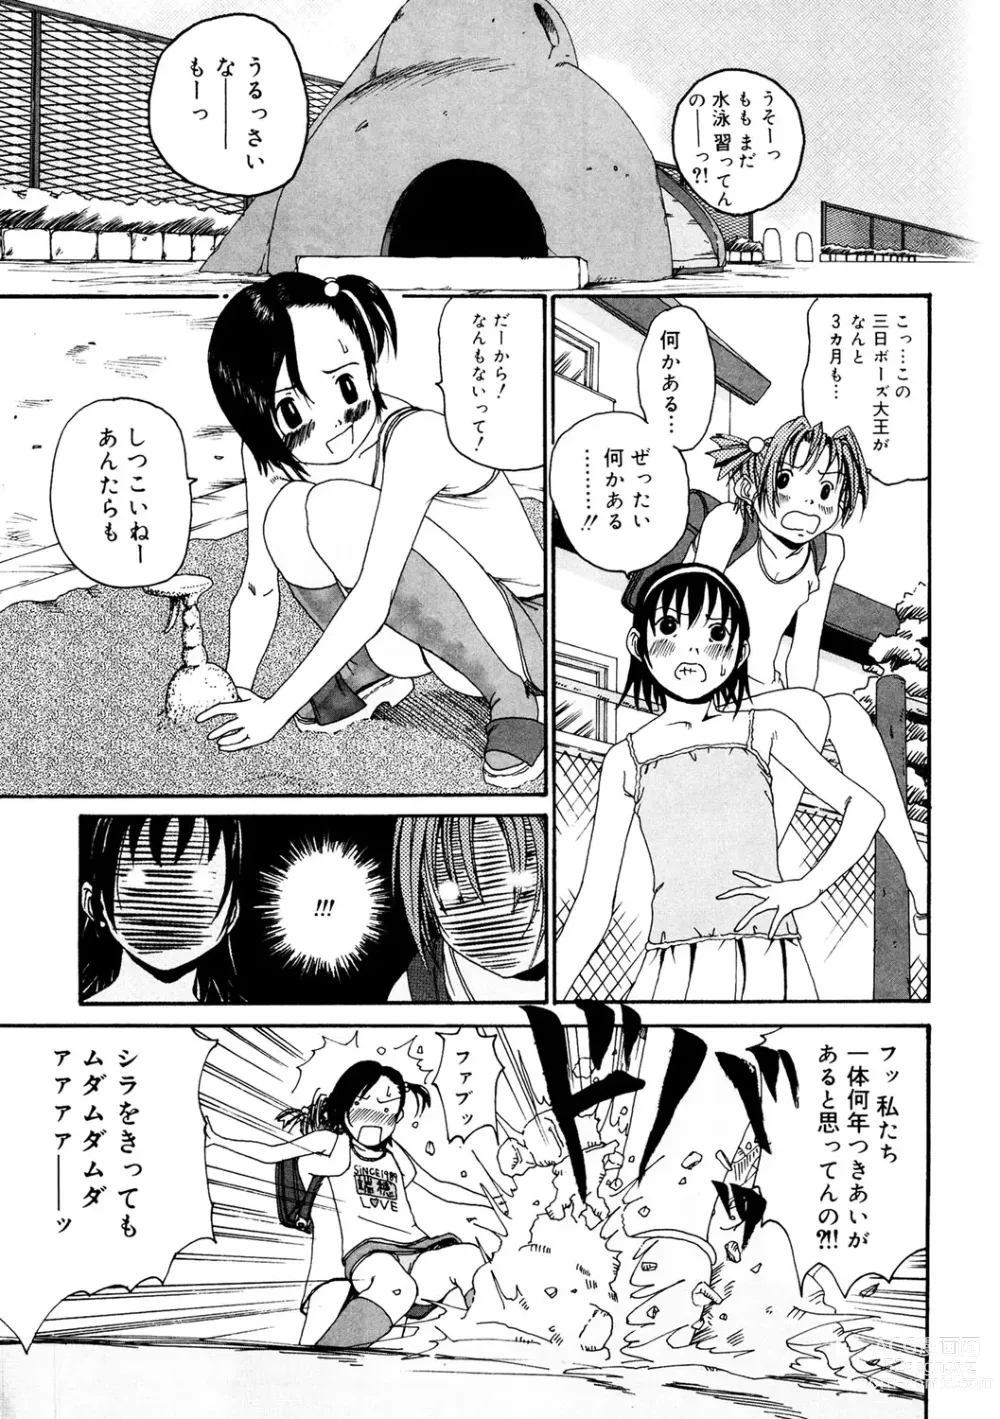 Page 181 of manga LQ -Little Queen- Vol. 52